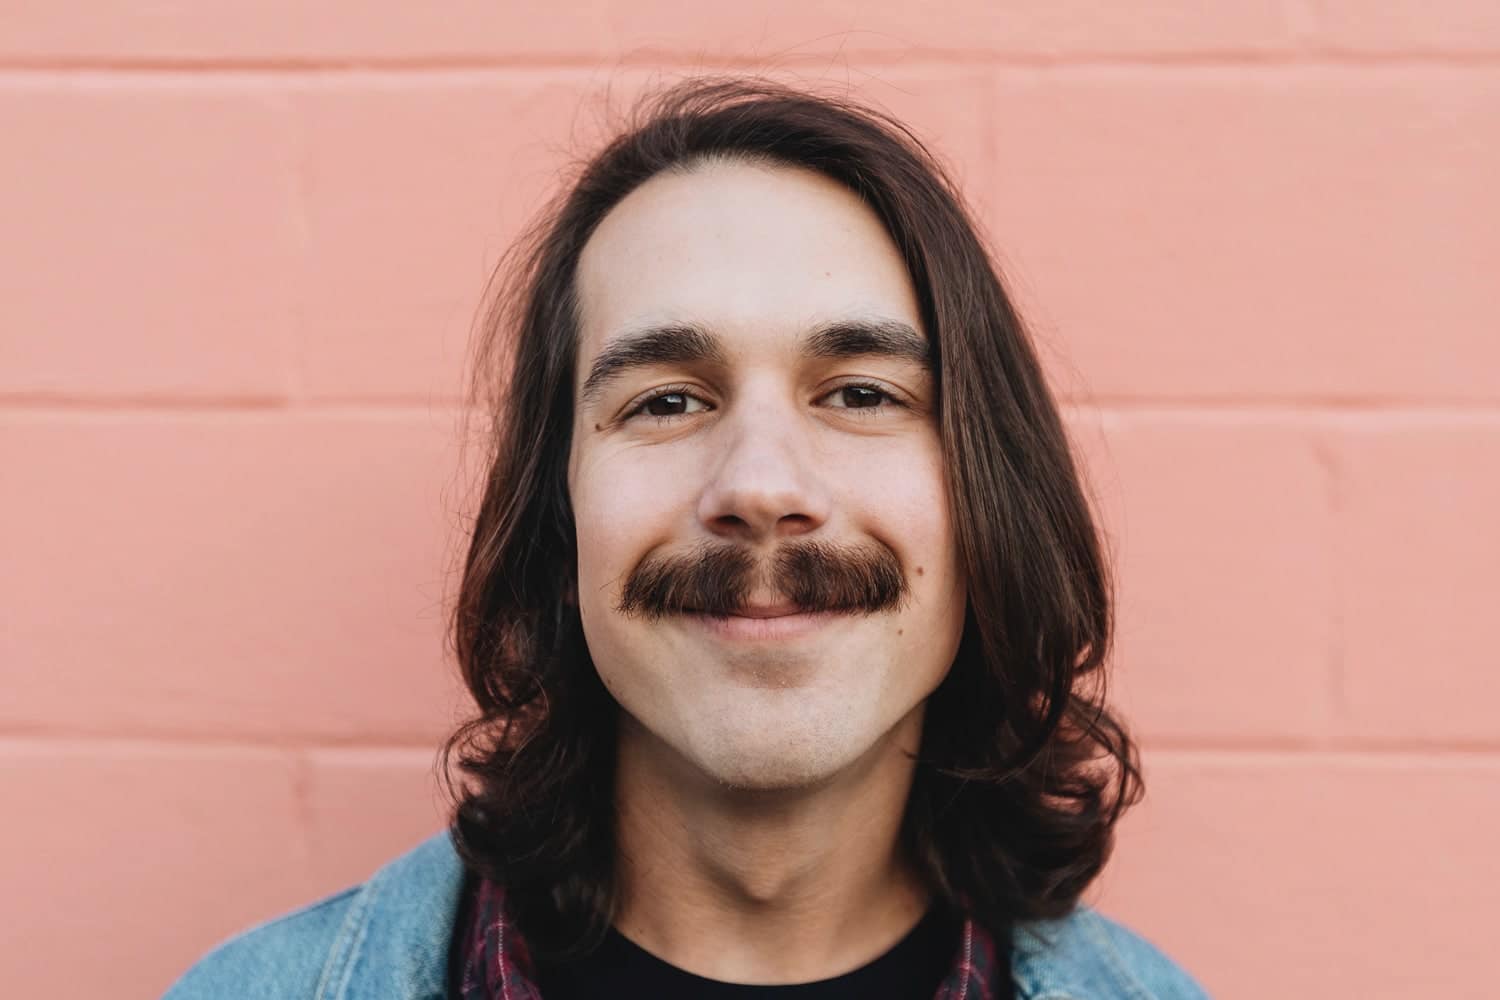 man smiling with long hair and a thick mustache